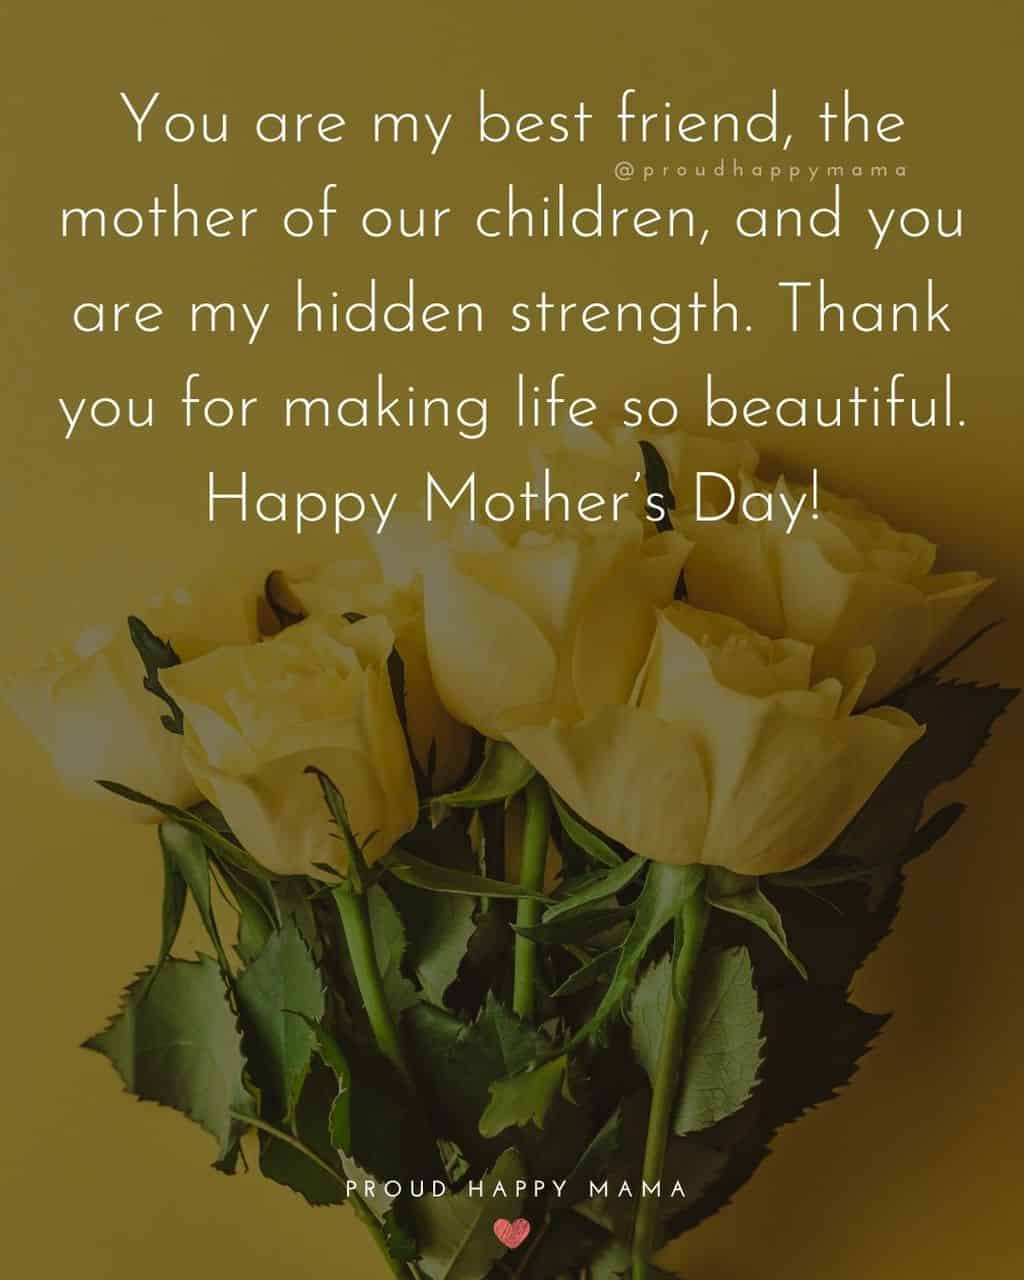 Happy Mothers Day Quotes For Wife - You are my best friend, the mother of our children, and you are my hidden strength.